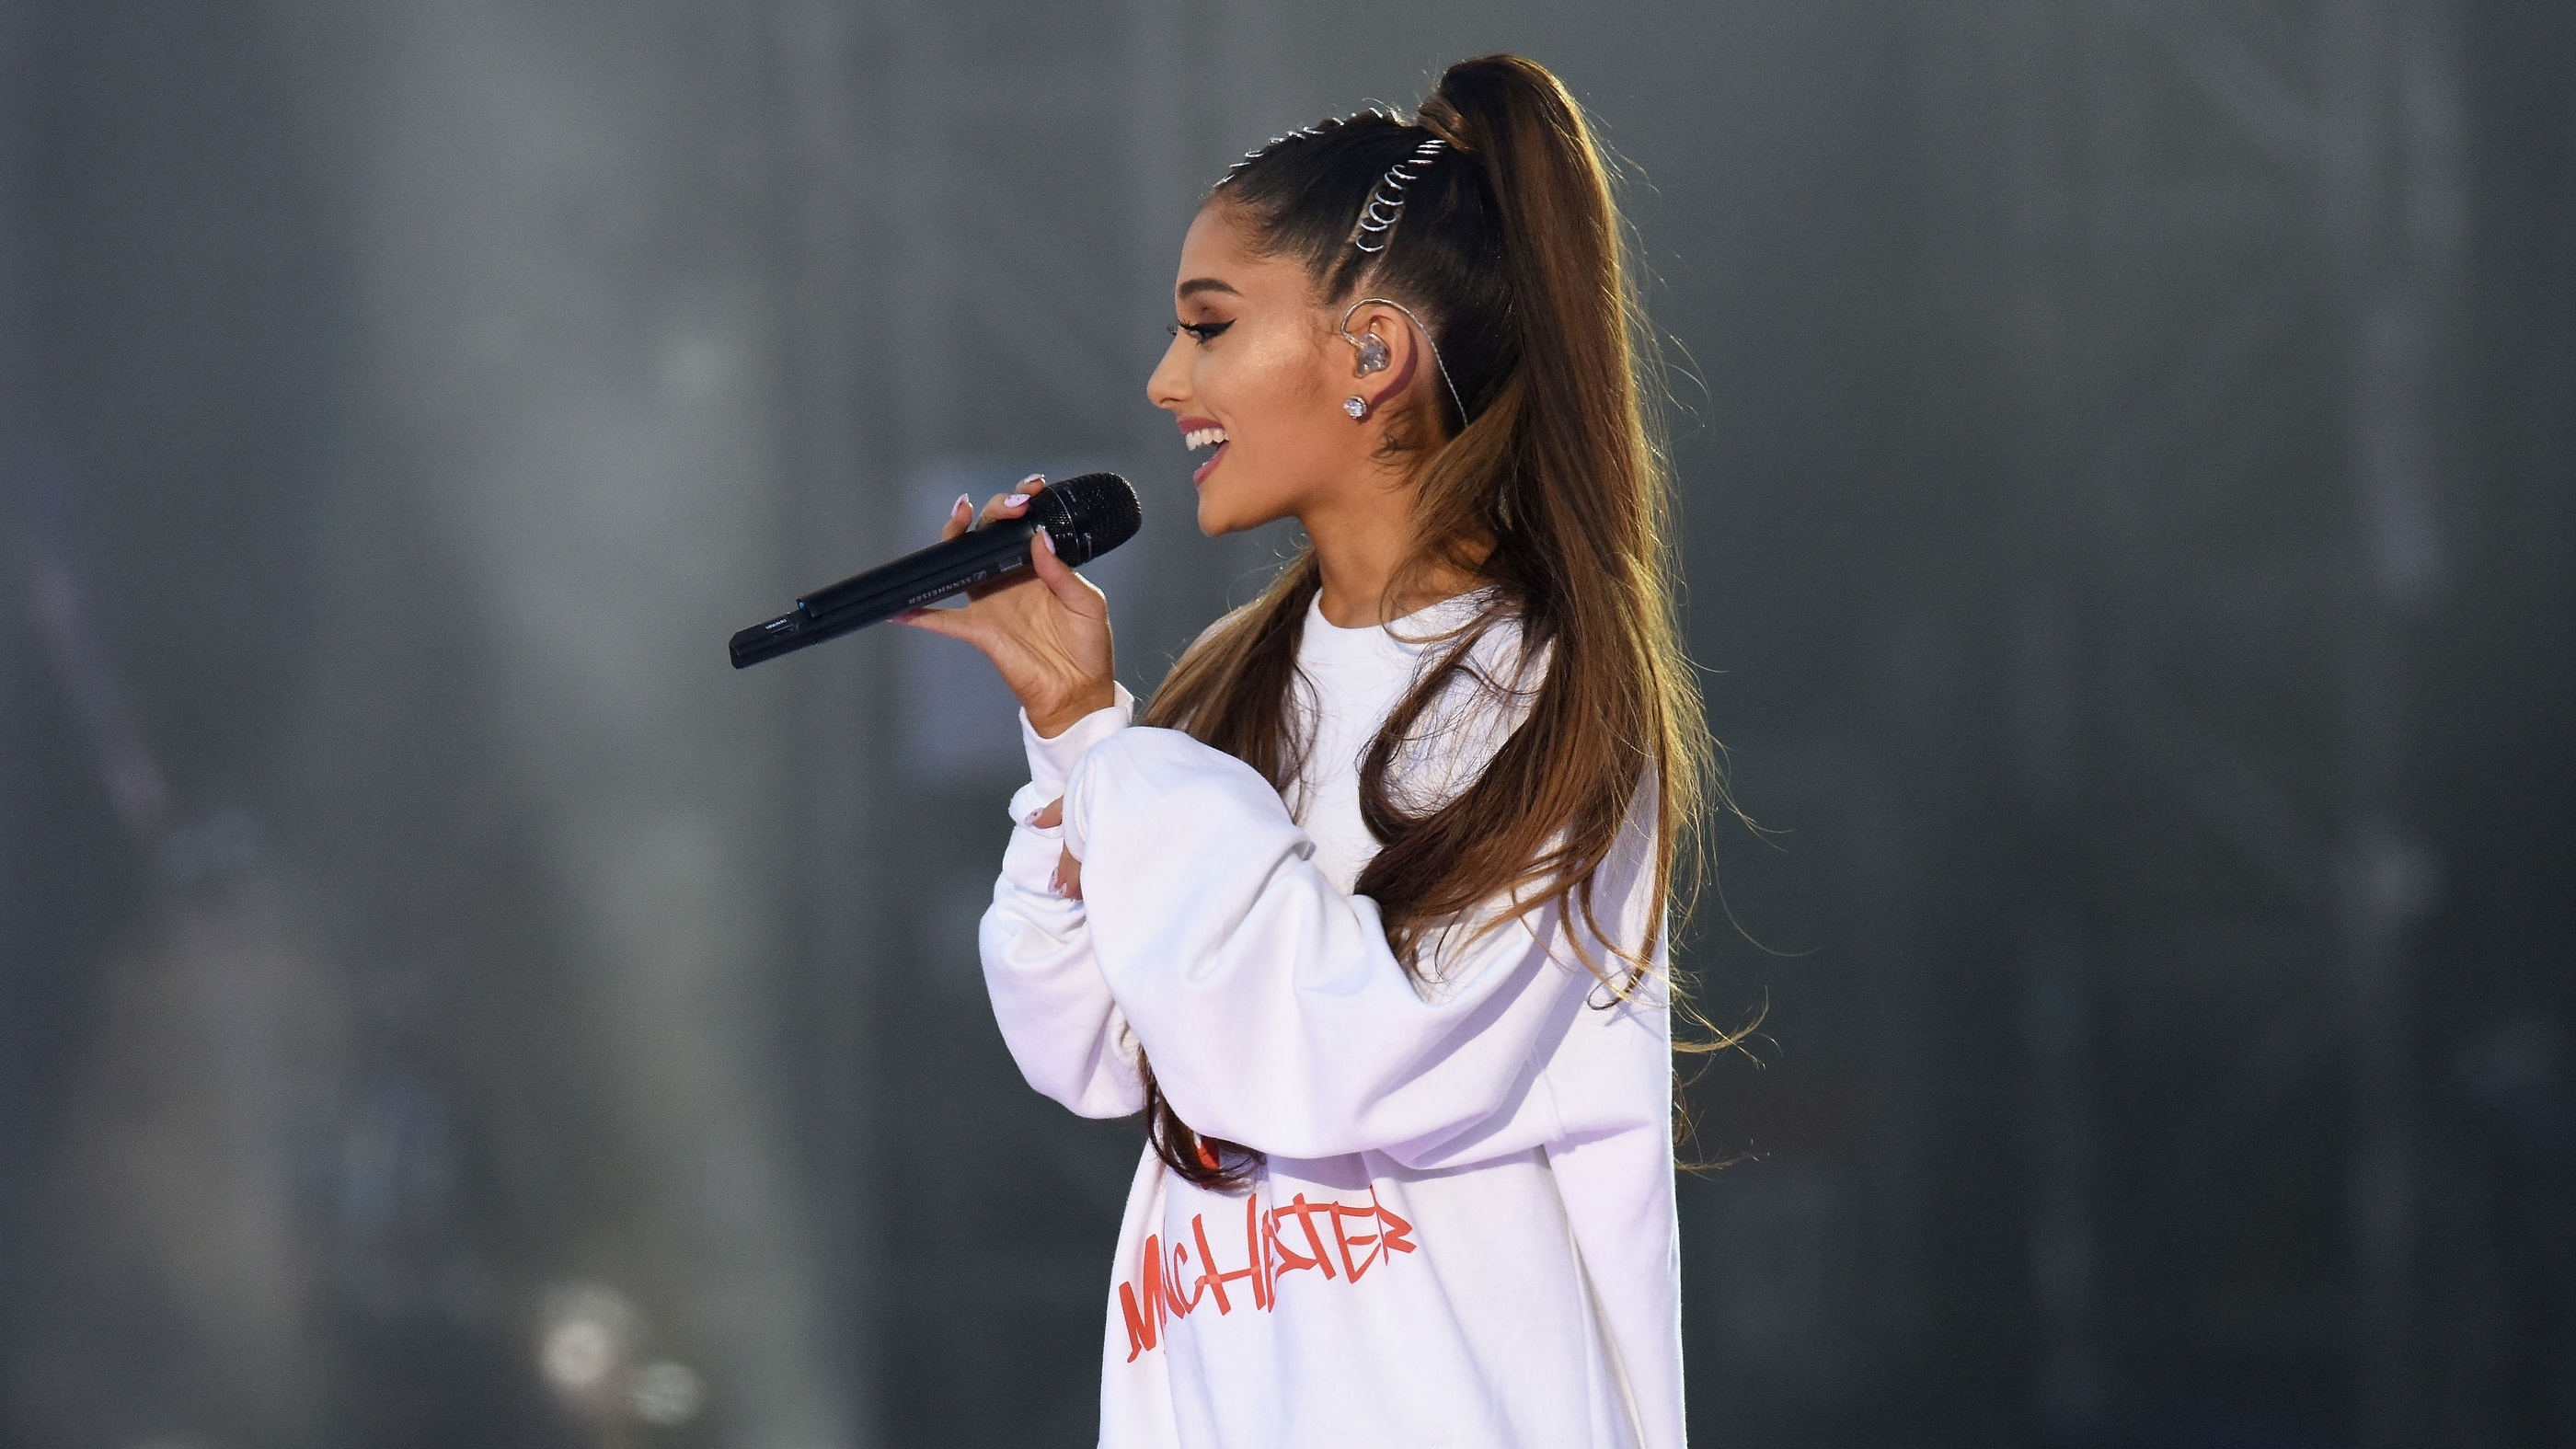 Ariana Grande performing during the One Love Manchester benefit concert for the victims of the Manchester Arena terror attack (Dave Hogan for One Love Manchester/PA)